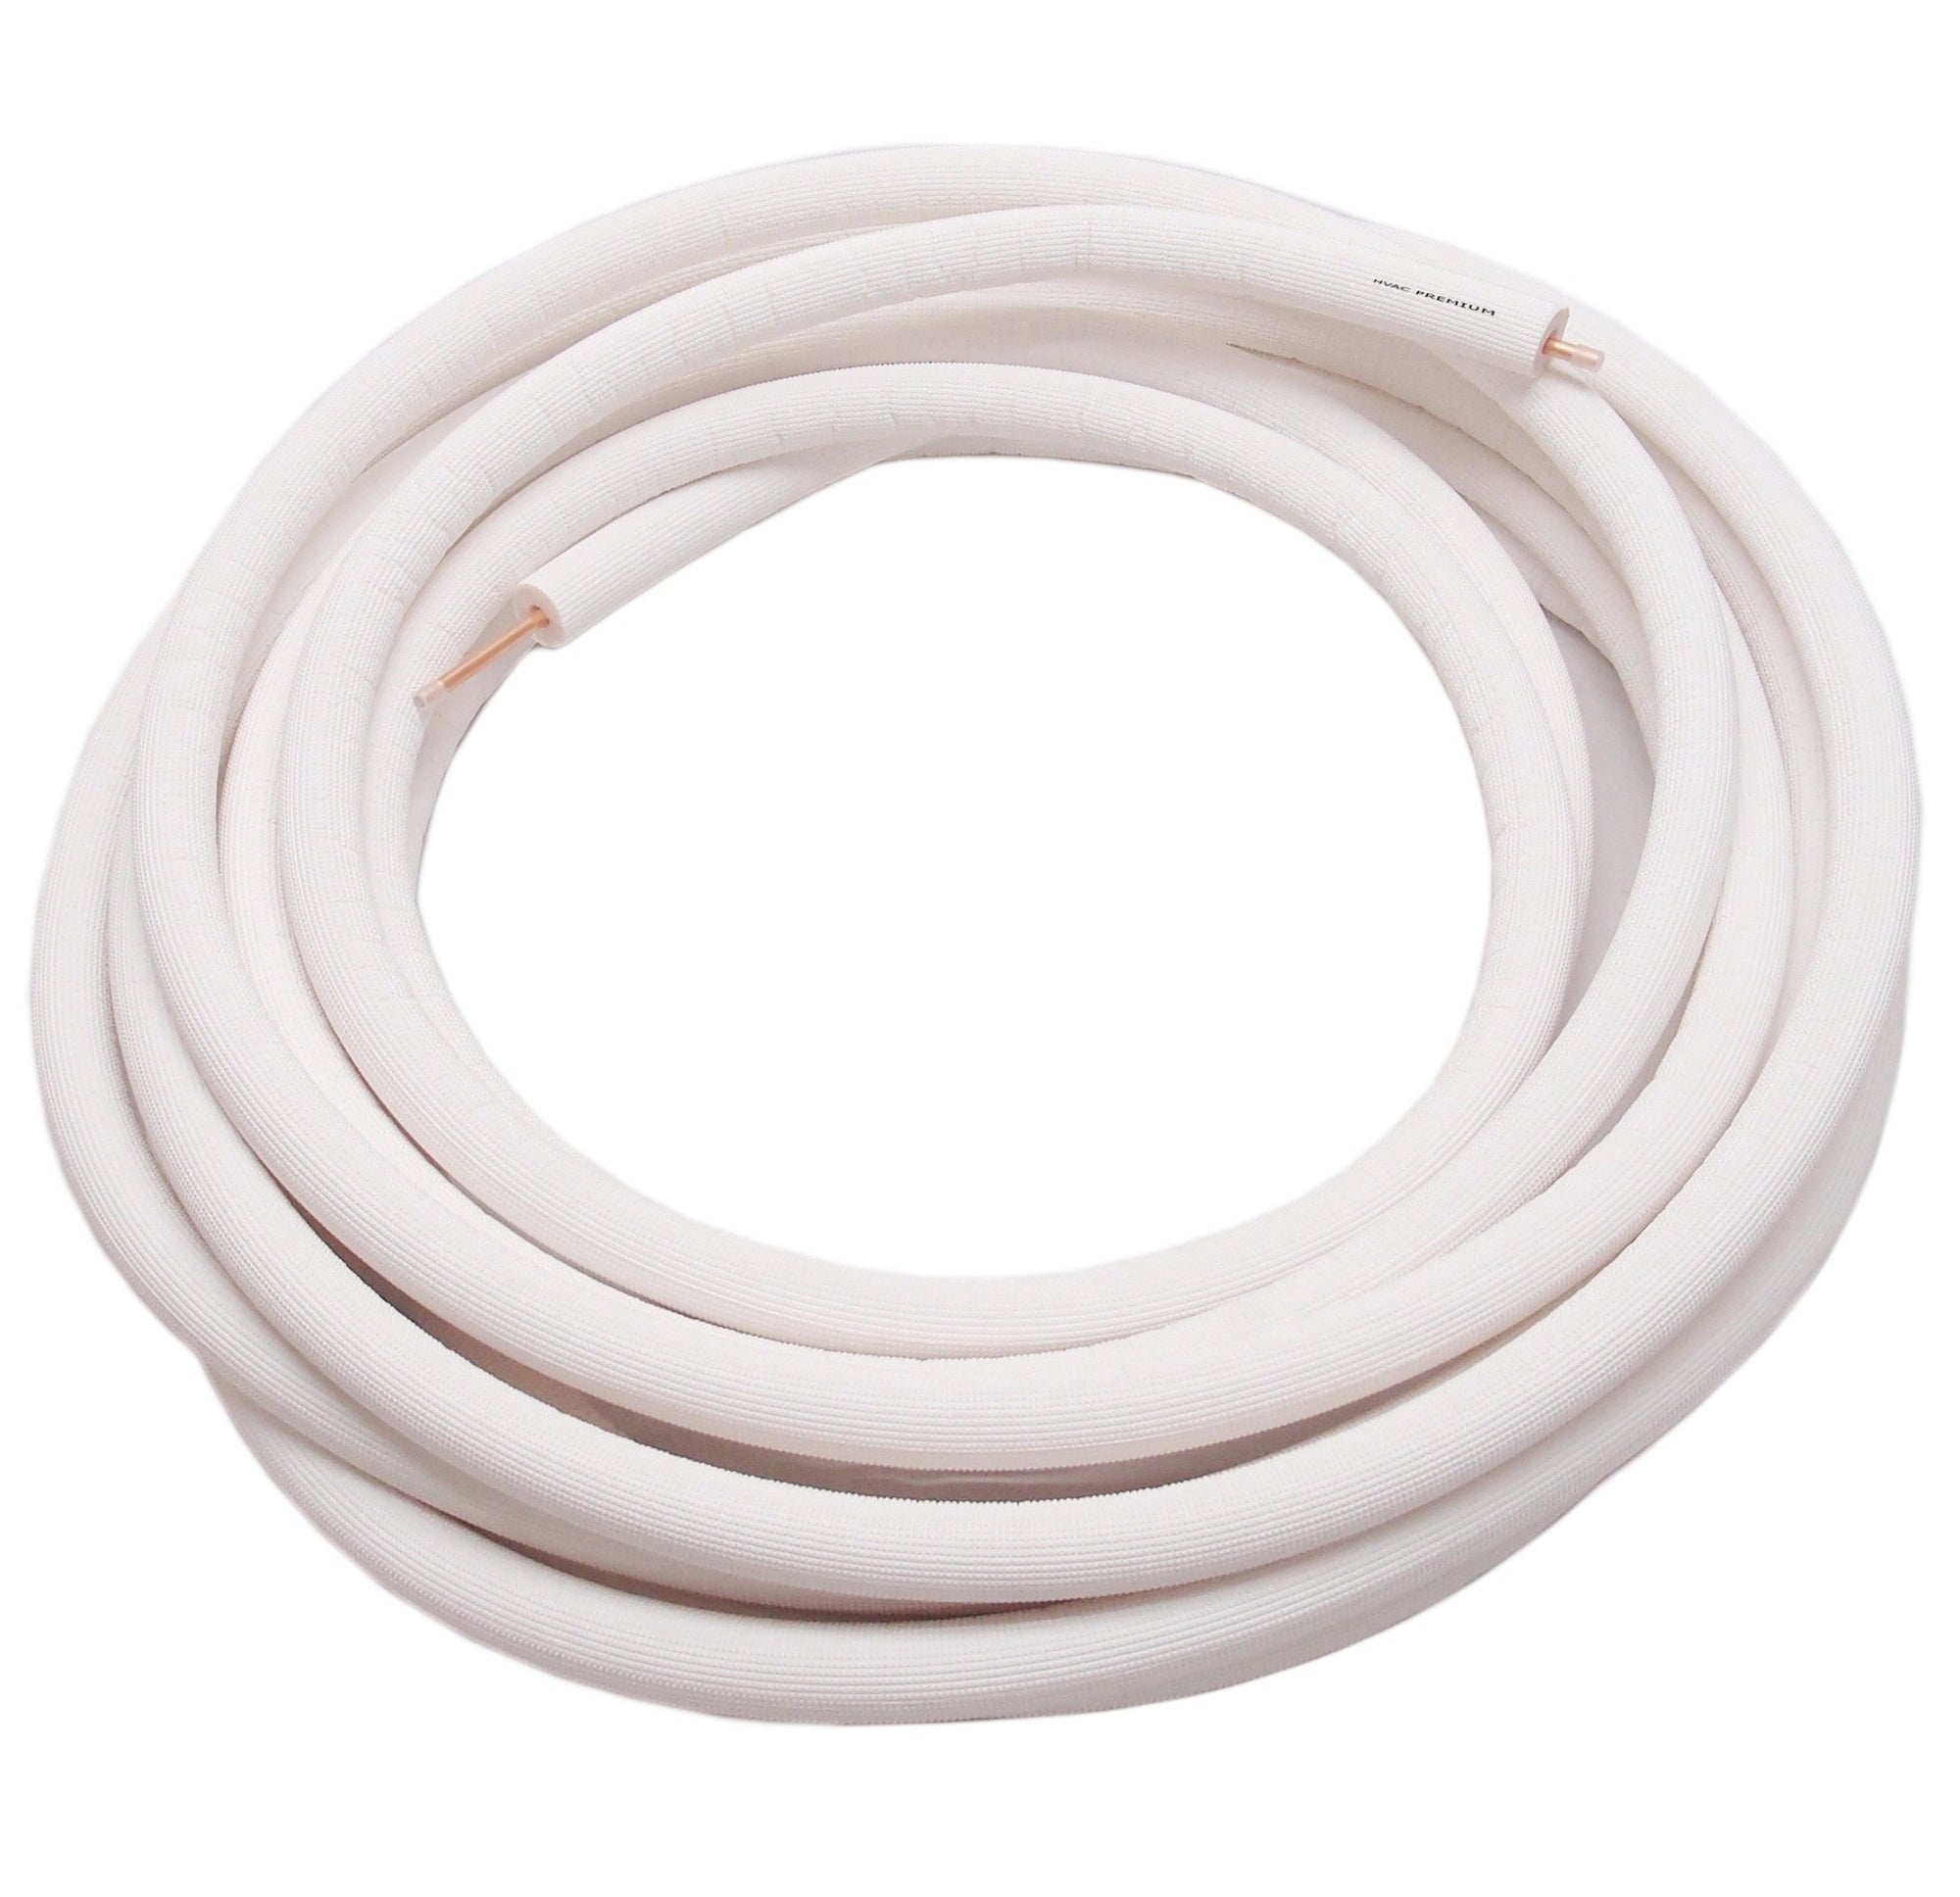 5/8" Insulated Copper Coil Line - Seamless Pipe Tube for HVAC, Refrigerant - 1/2" White Insulation - 164' Long